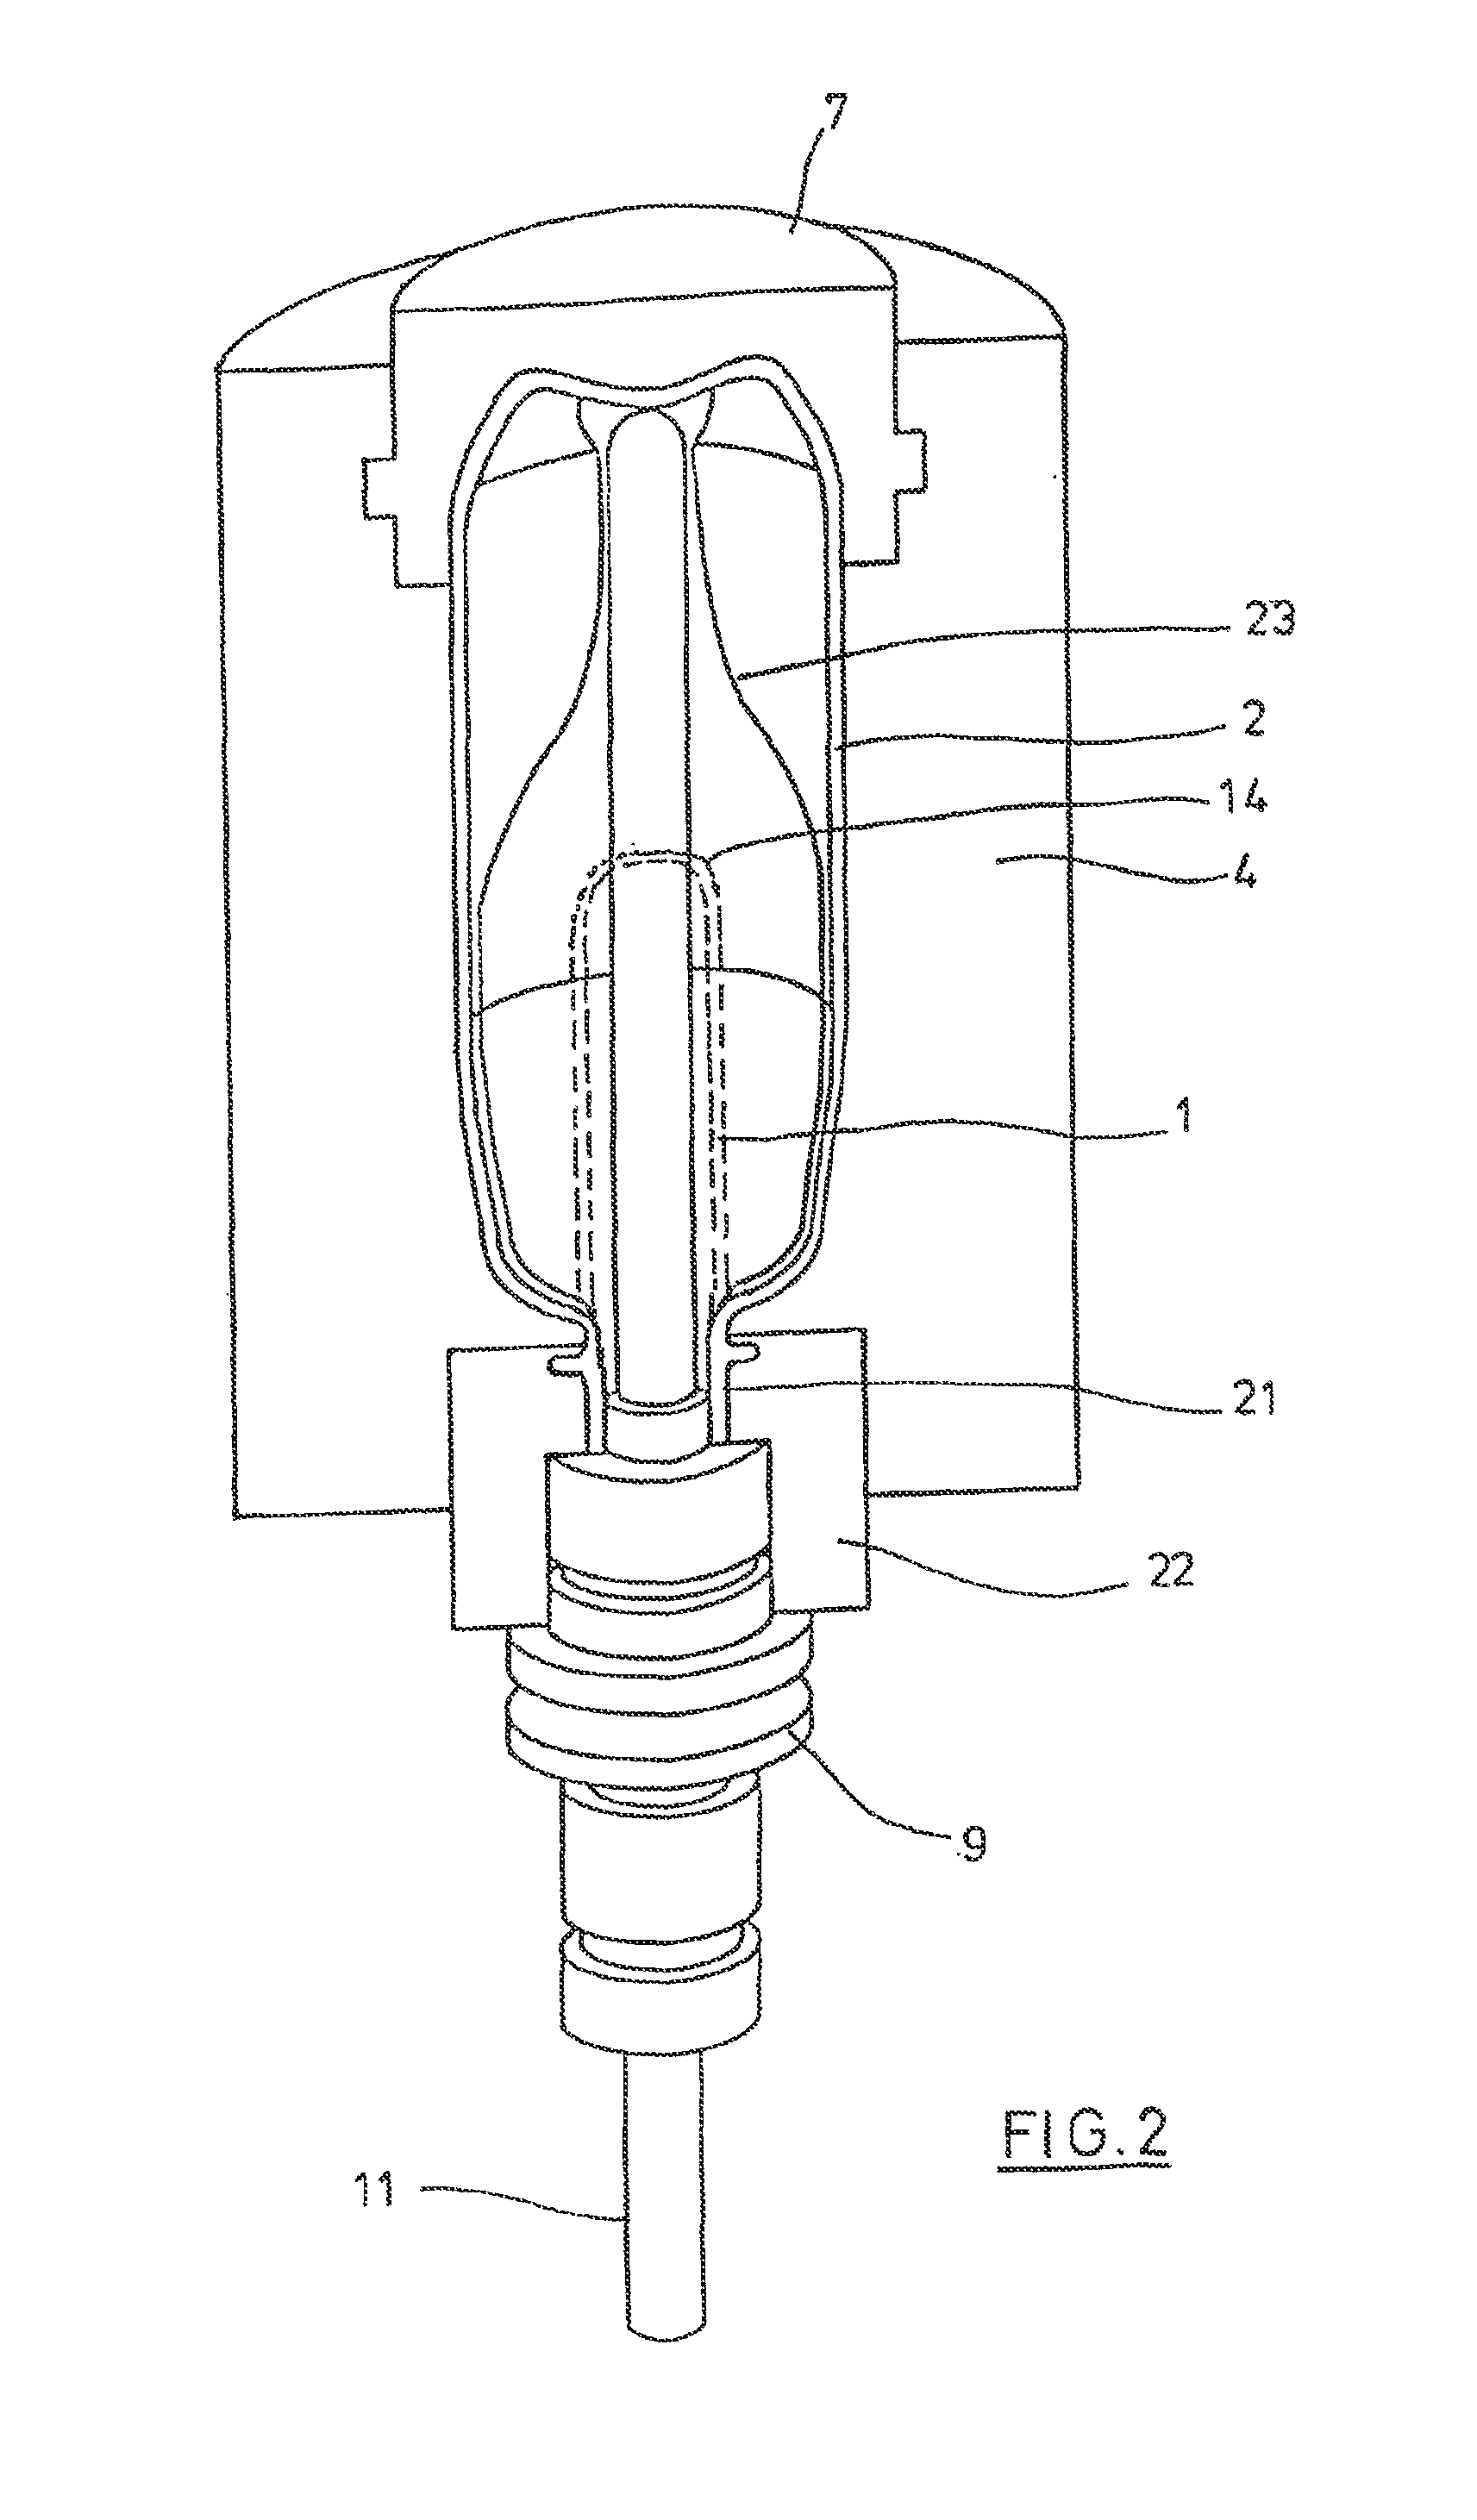 Method and device for blow molding containers